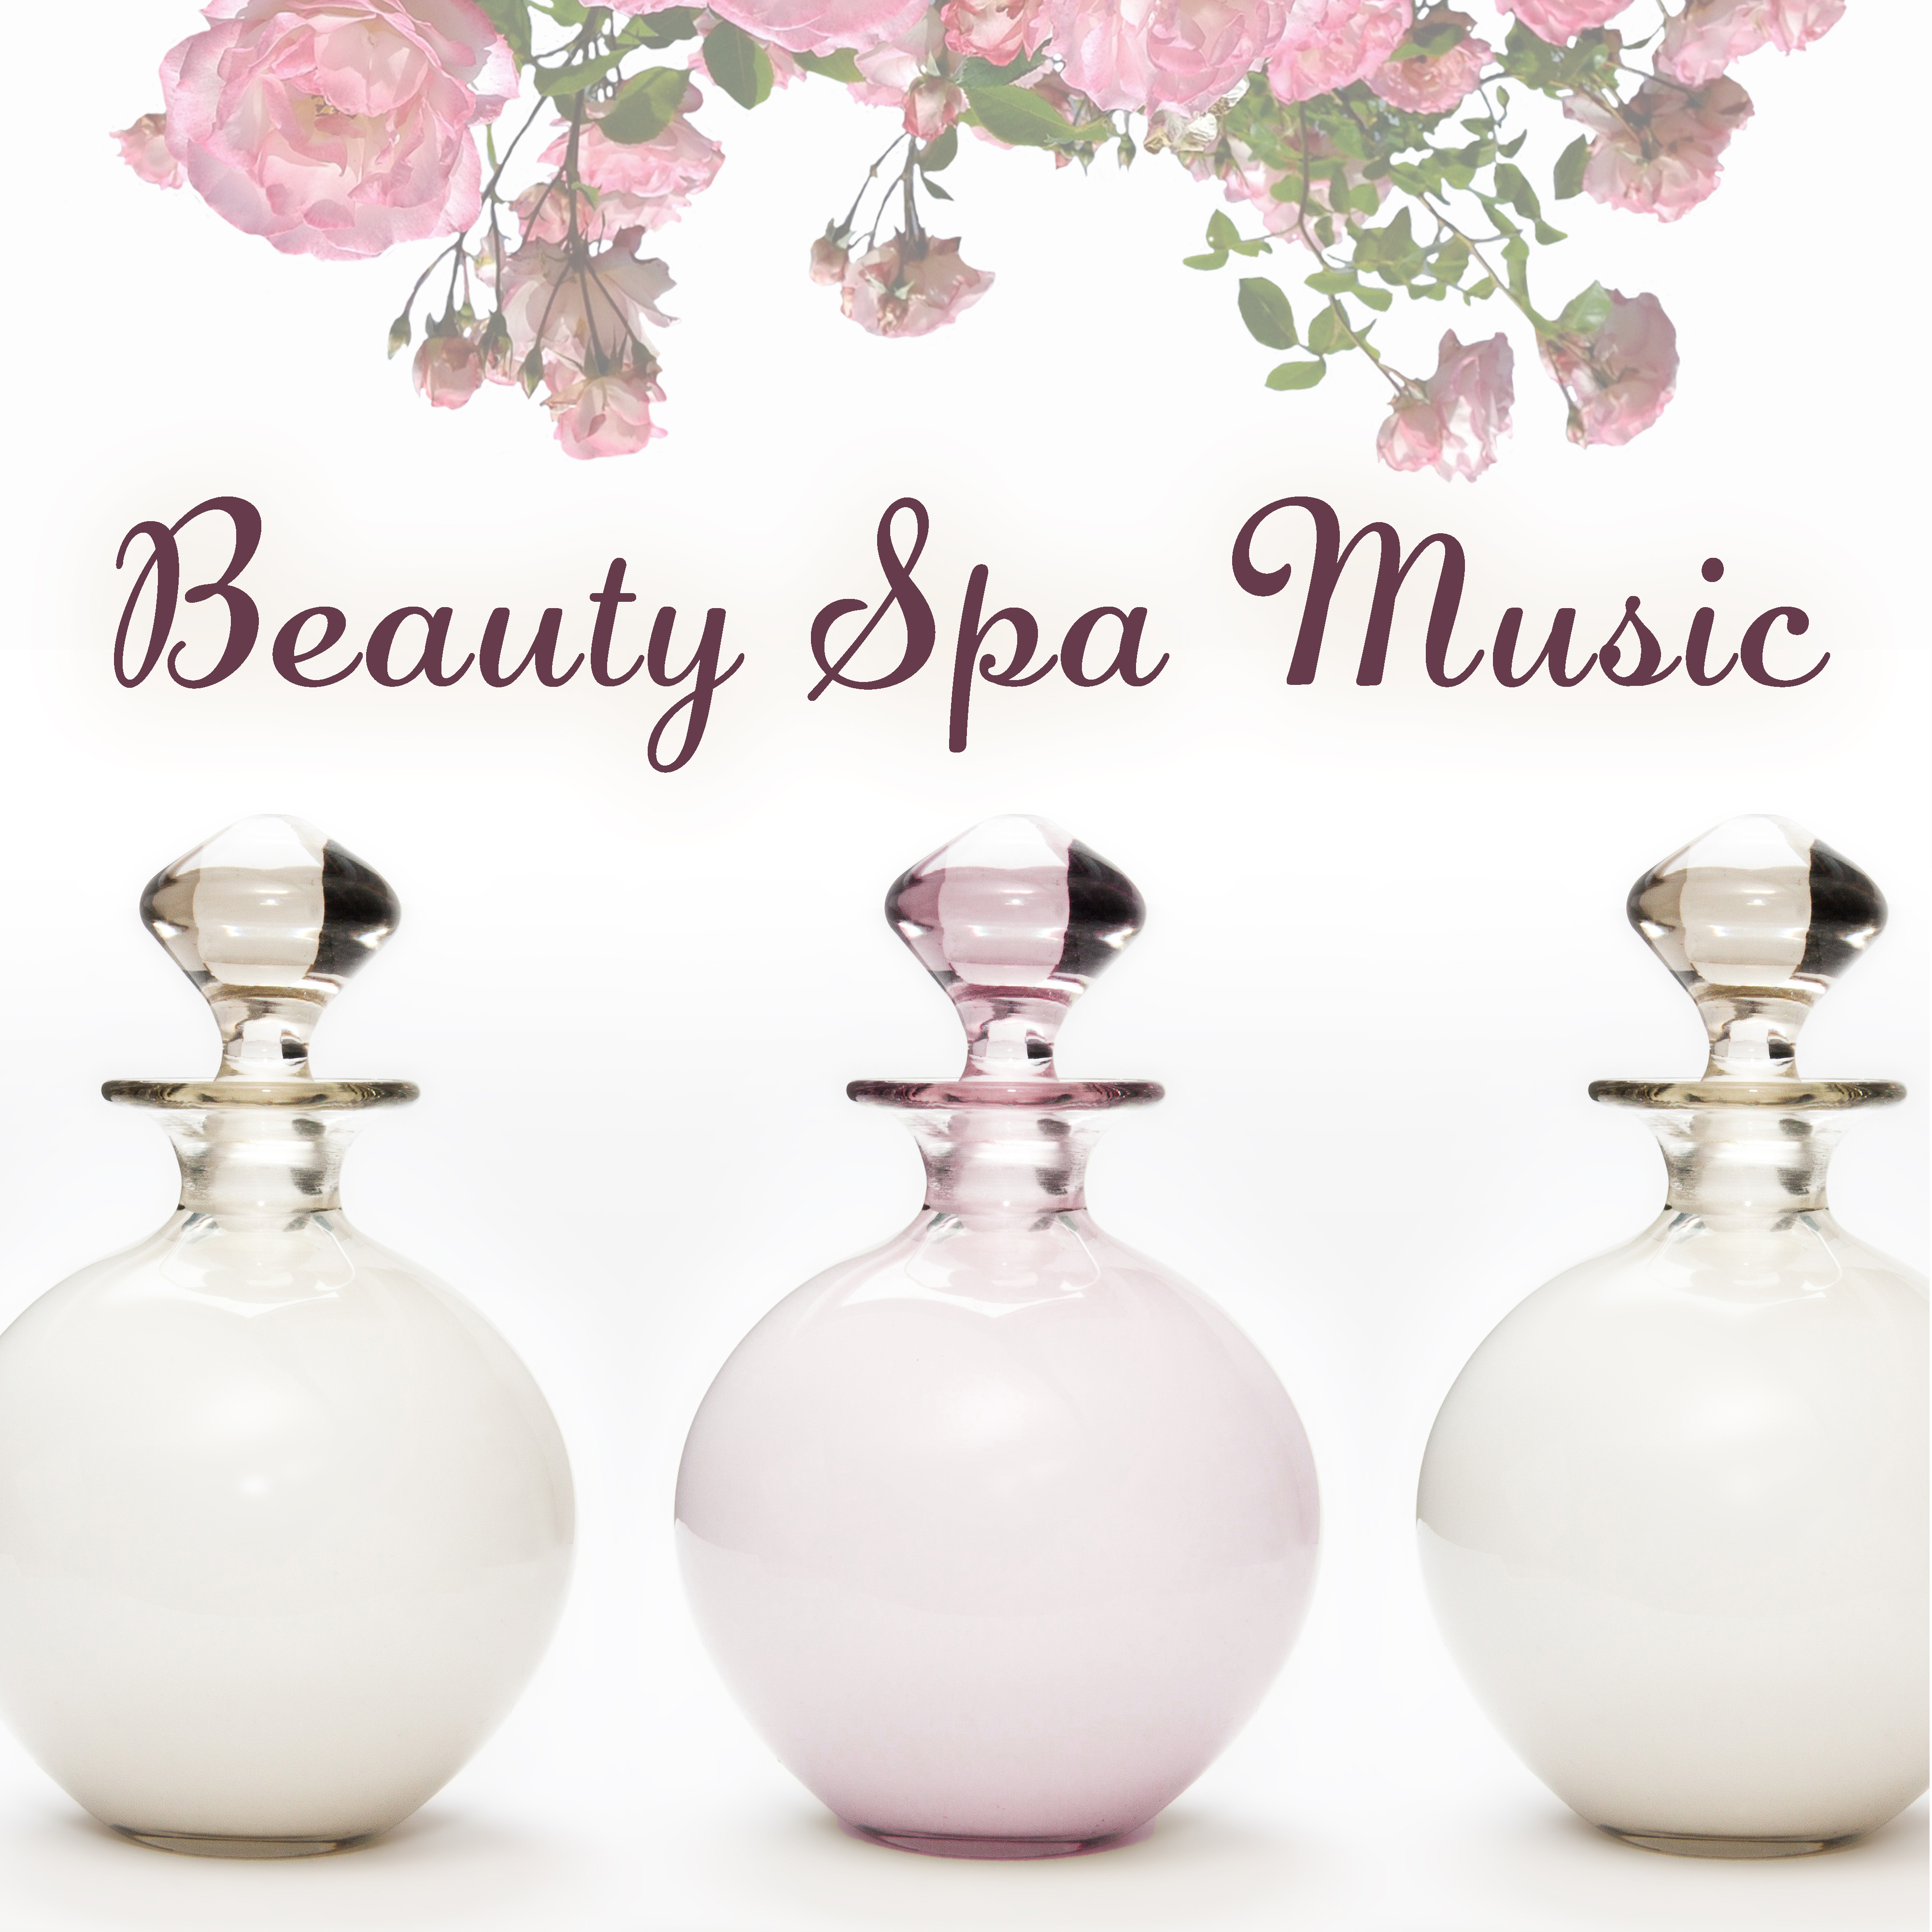 Beauty Spa Music  Relaxing Music for Spa, Wellness, Water Sounds Music